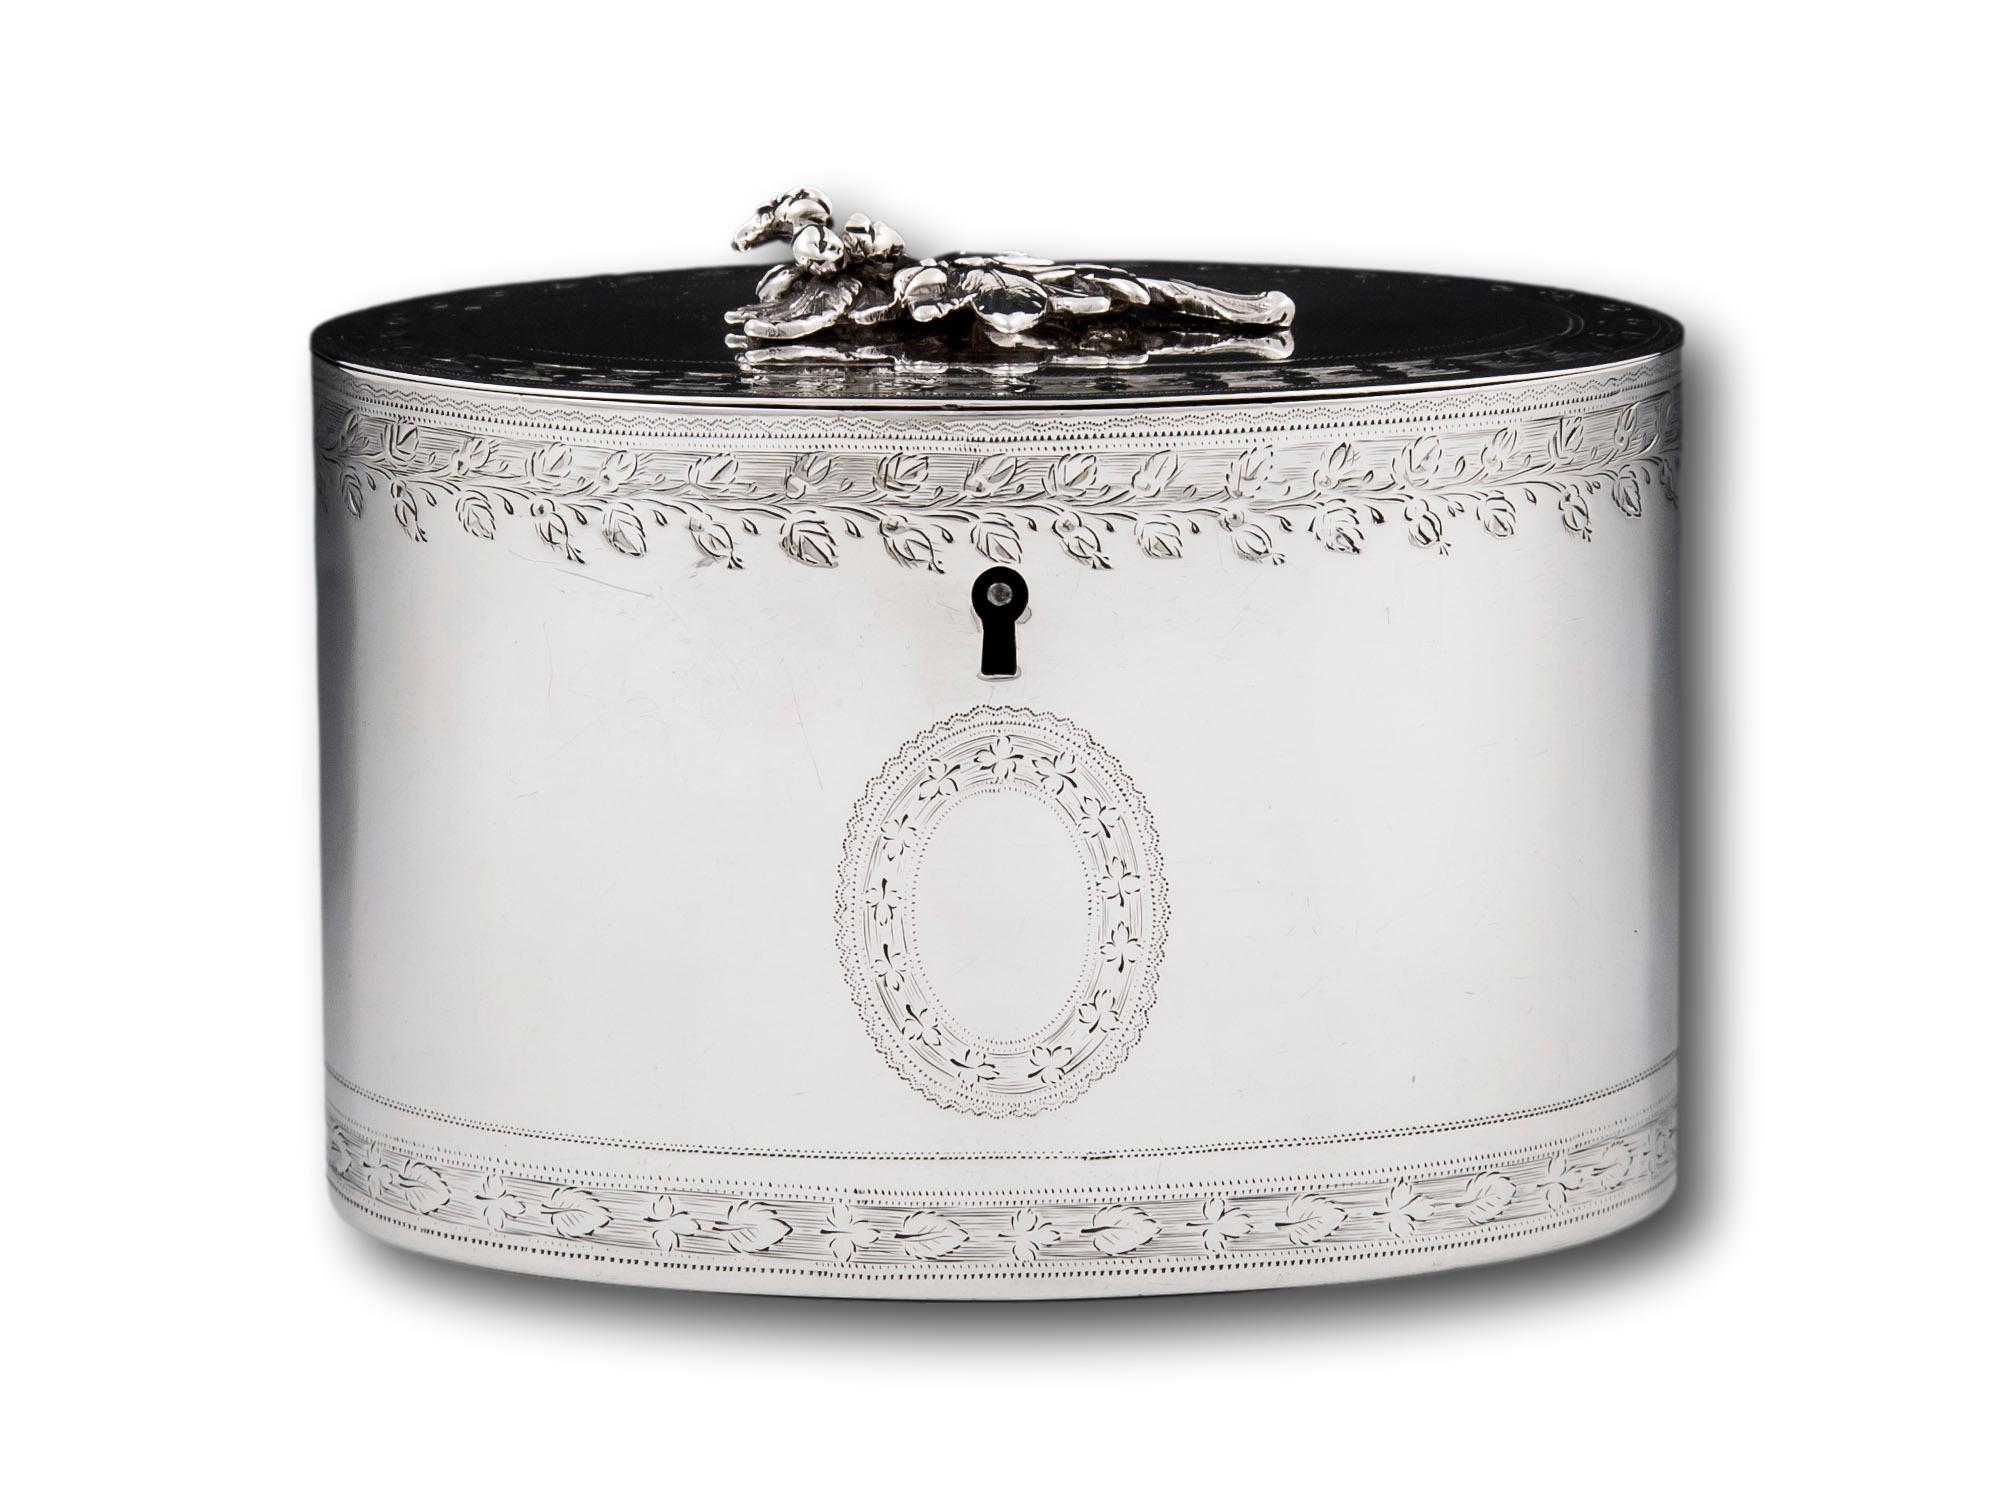 Sheffield Silversmith Richard Morton & Co 1779

From our Tea Caddy collection, we are delighted to offer this Georgian Sterling Silver Tea Caddy. The Tea Caddy of oval shape and unusually smaller design is beautifully decorated with bright cut